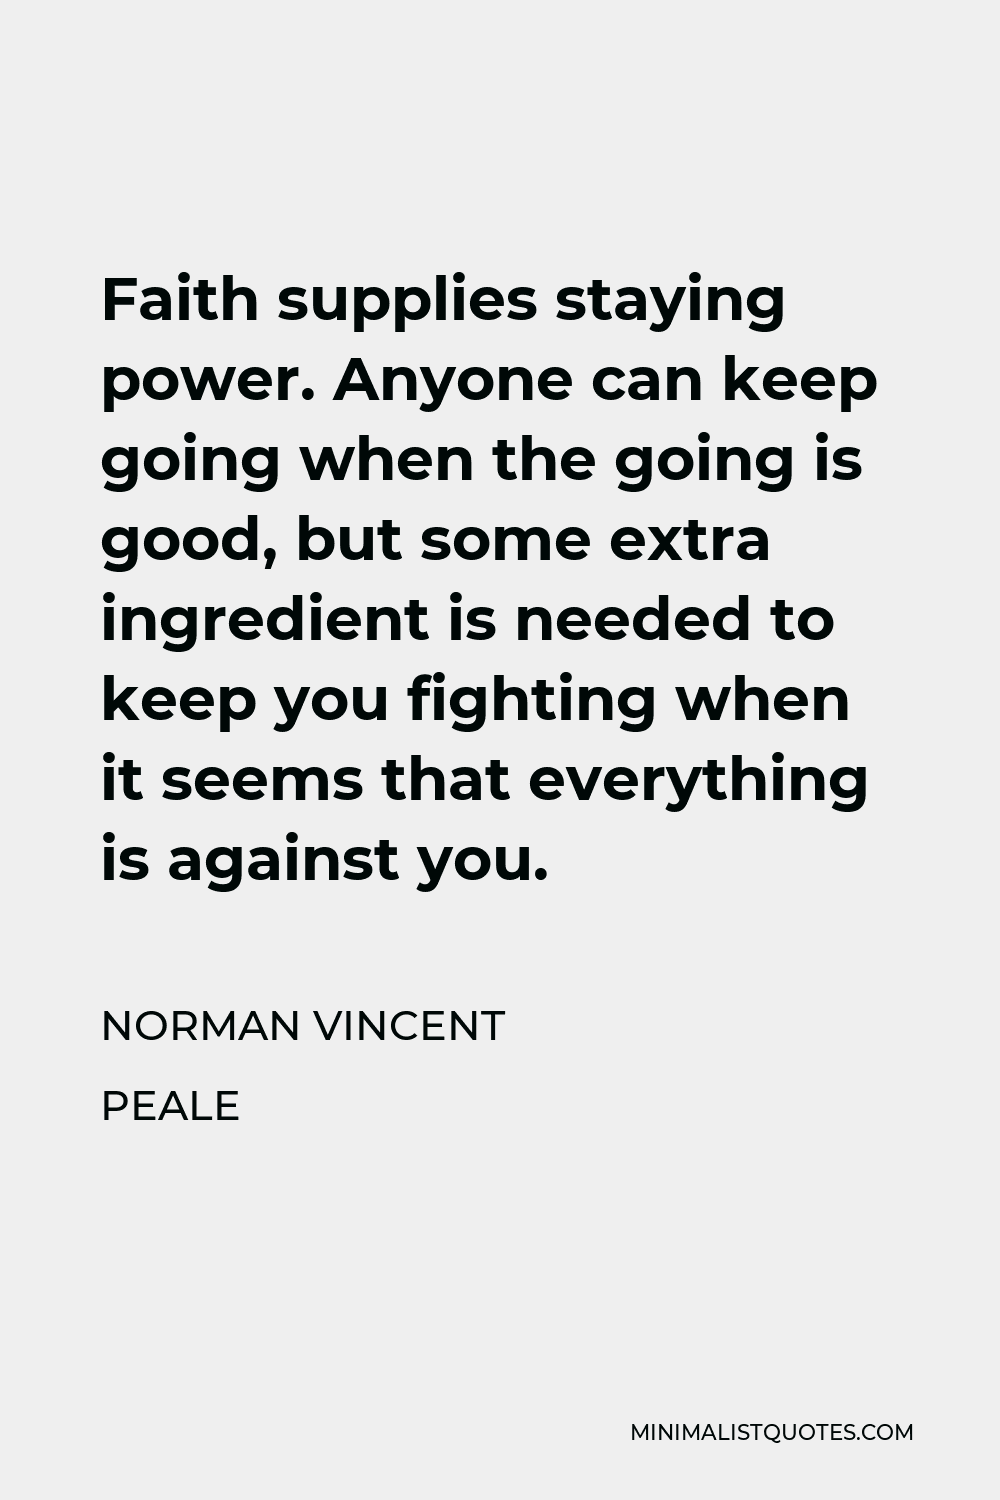 Norman Vincent Peale Quote - Faith supplies staying power. Anyone can keep going when the going is good, but some extra ingredient is needed to keep you fighting when it seems that everything is against you.